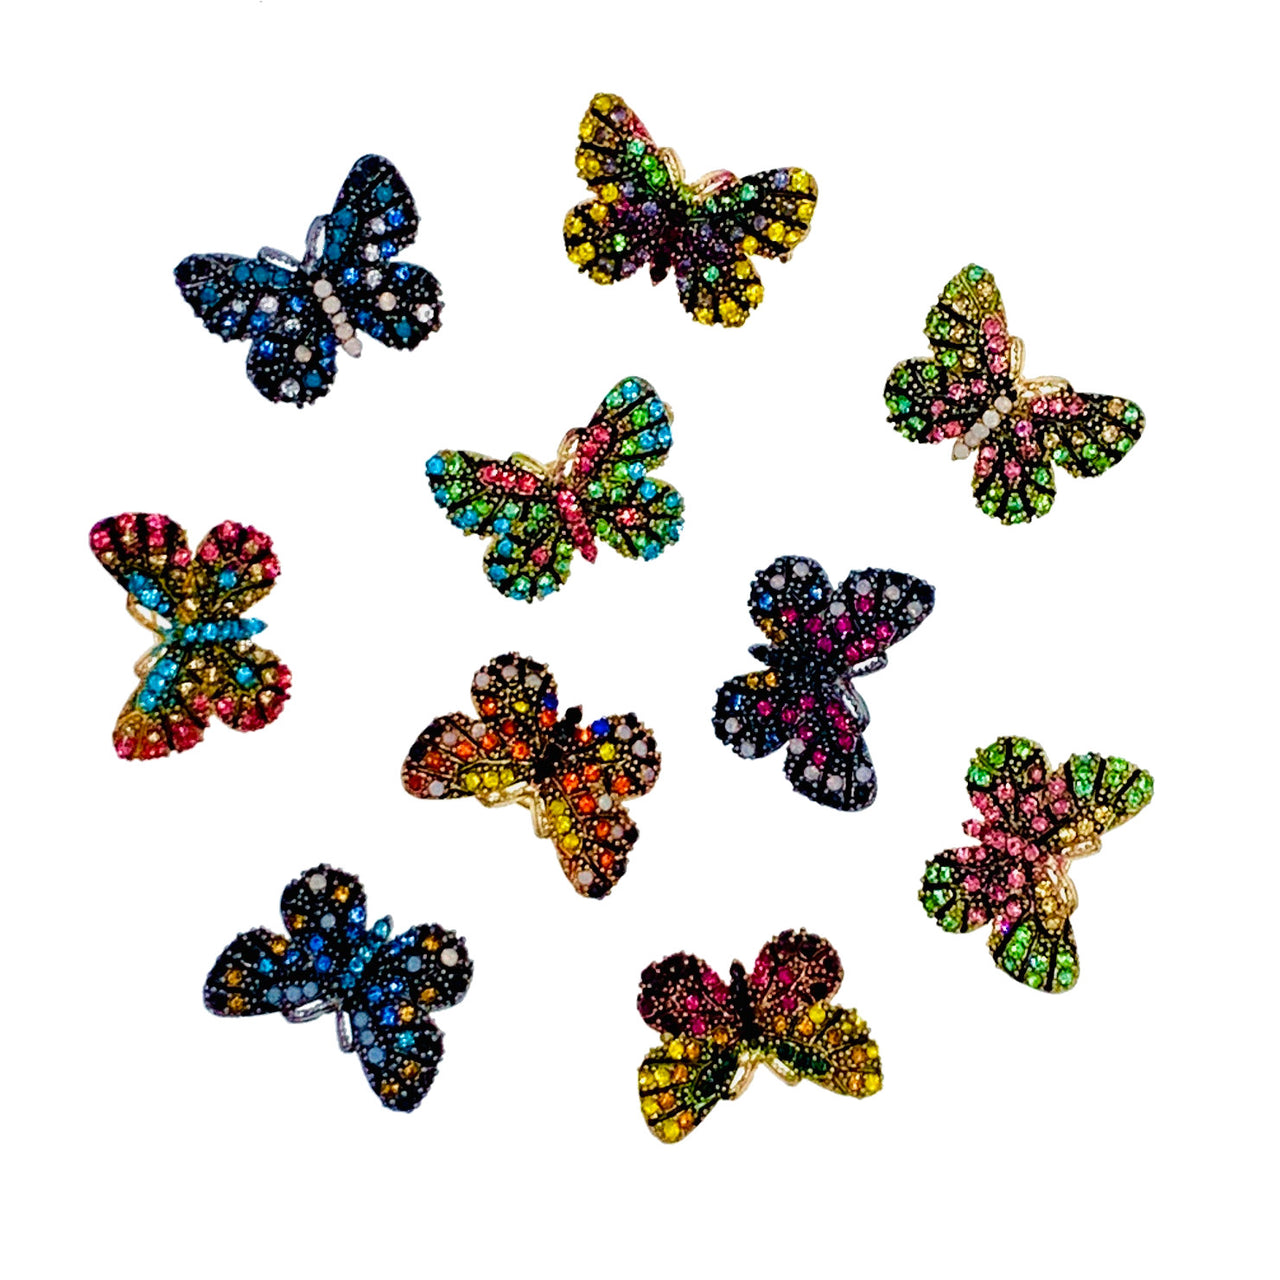 Fairy Handmade Small Butterfly Brooch Pin use Swarovski Elementary Crystal Pink Blue Gold Brown Yellow Green Purple Black White Hat Dress Scarf, Brooch - MOGHANT